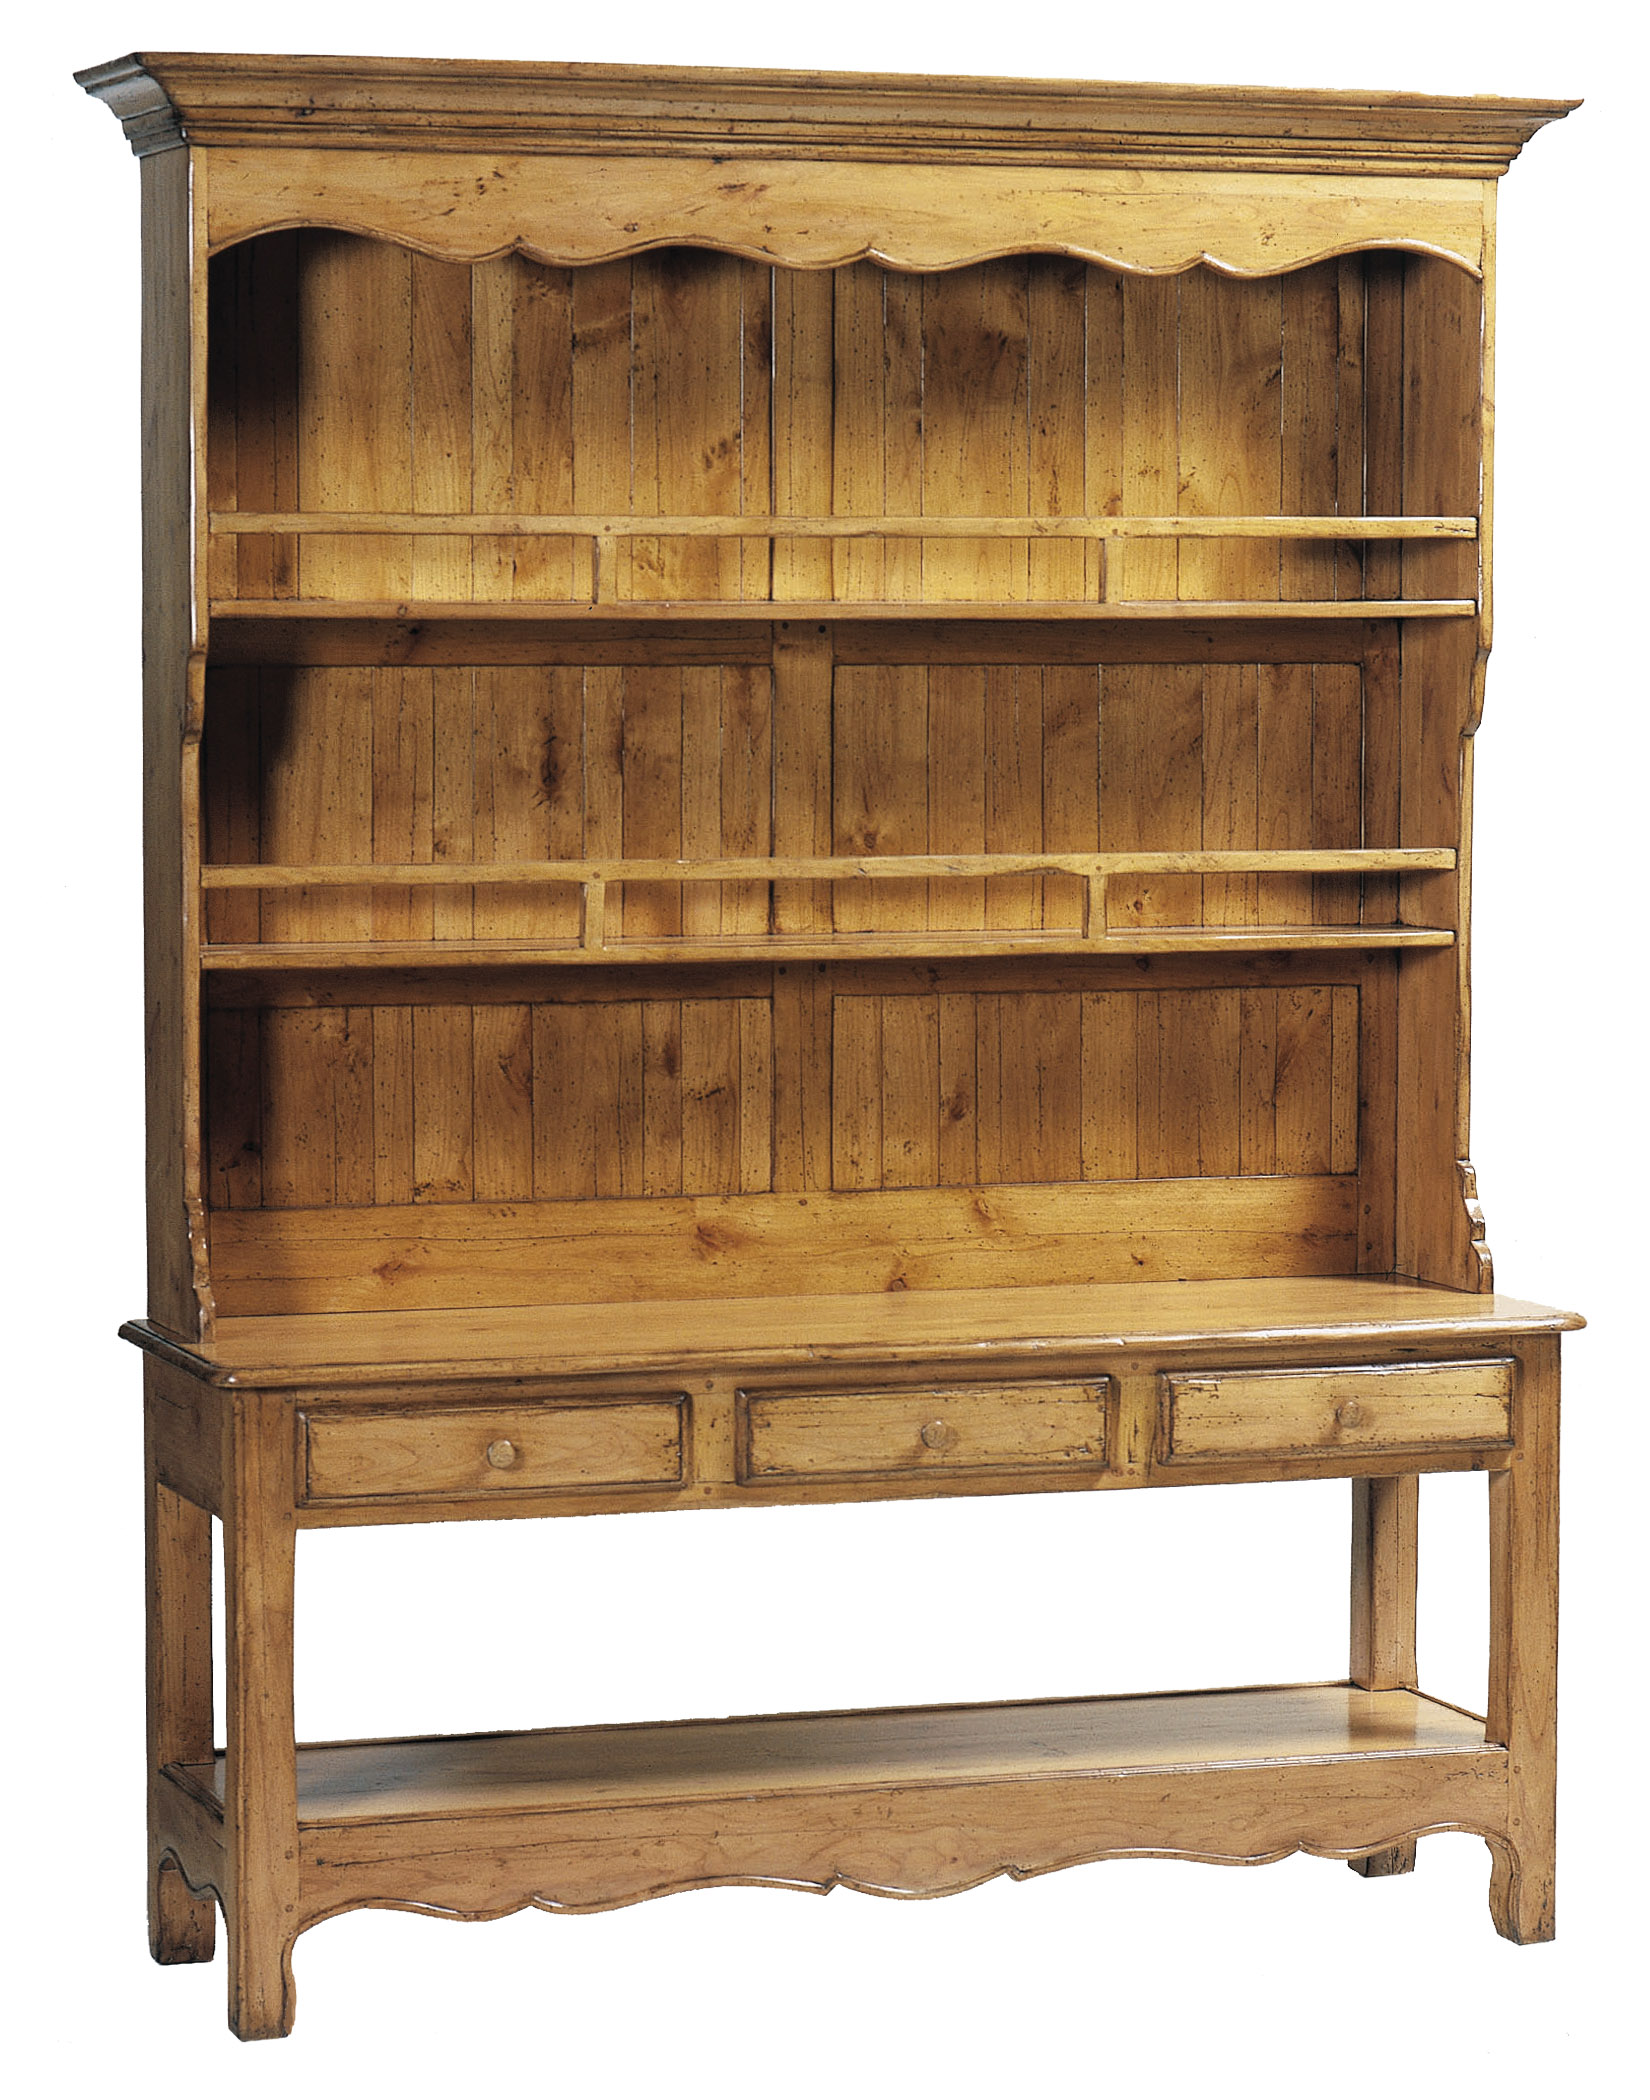 Webb traditional country cabinet with hutch and sofa table by Woodland Furniture in Idaho Falls